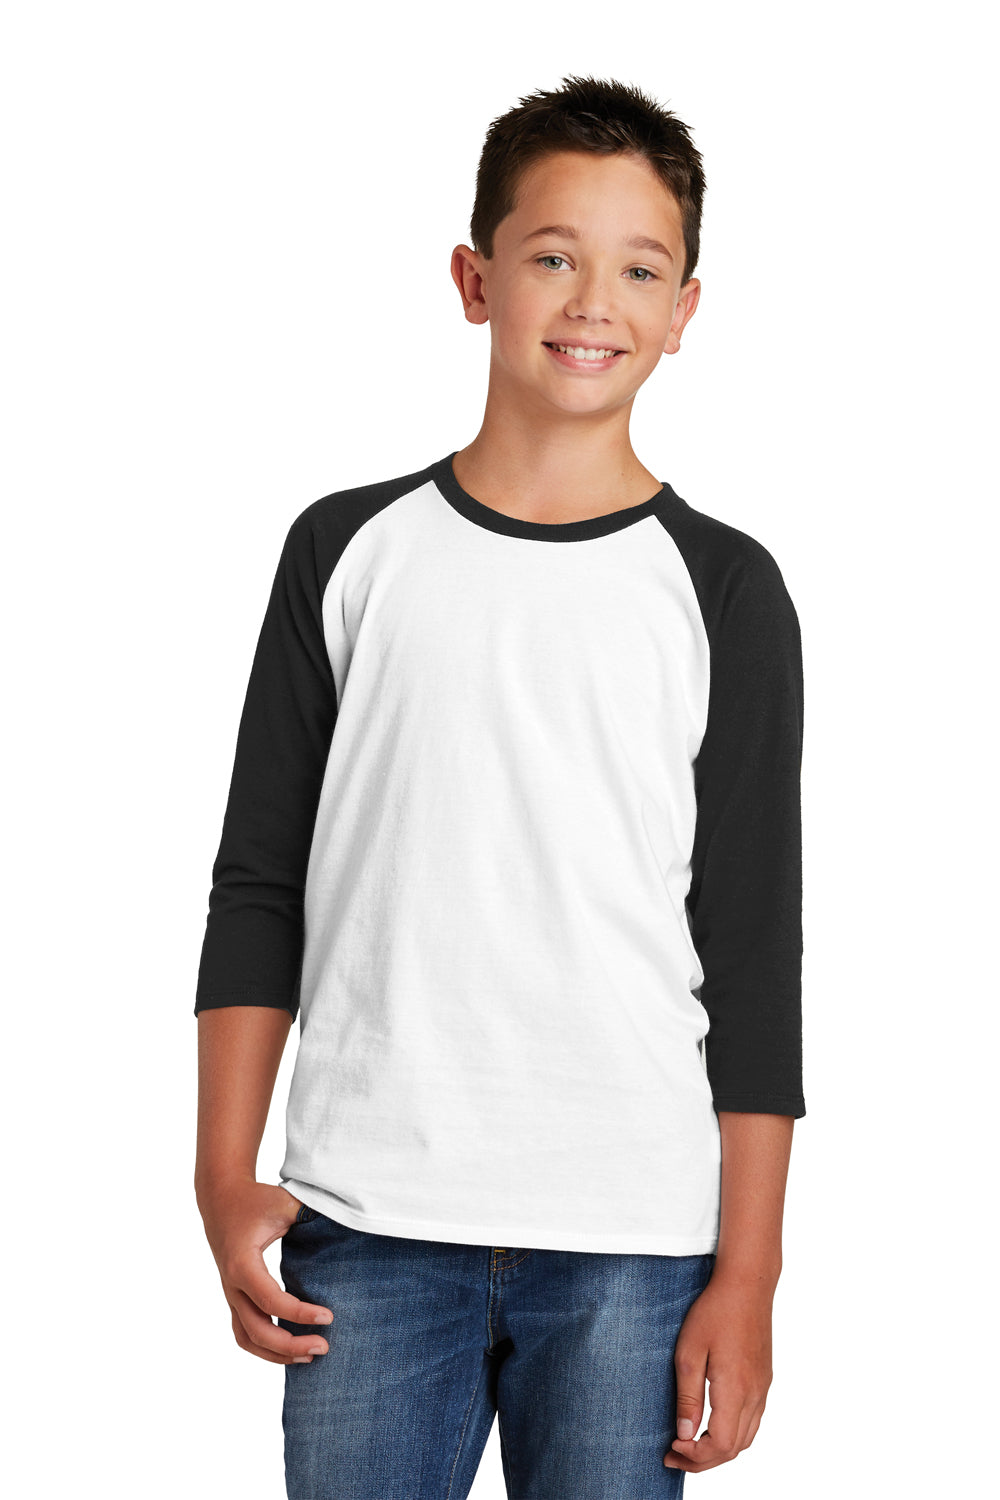 District DT6210Y Youth Very Important 3/4 Sleeve Crewneck T-Shirt White/Black Front